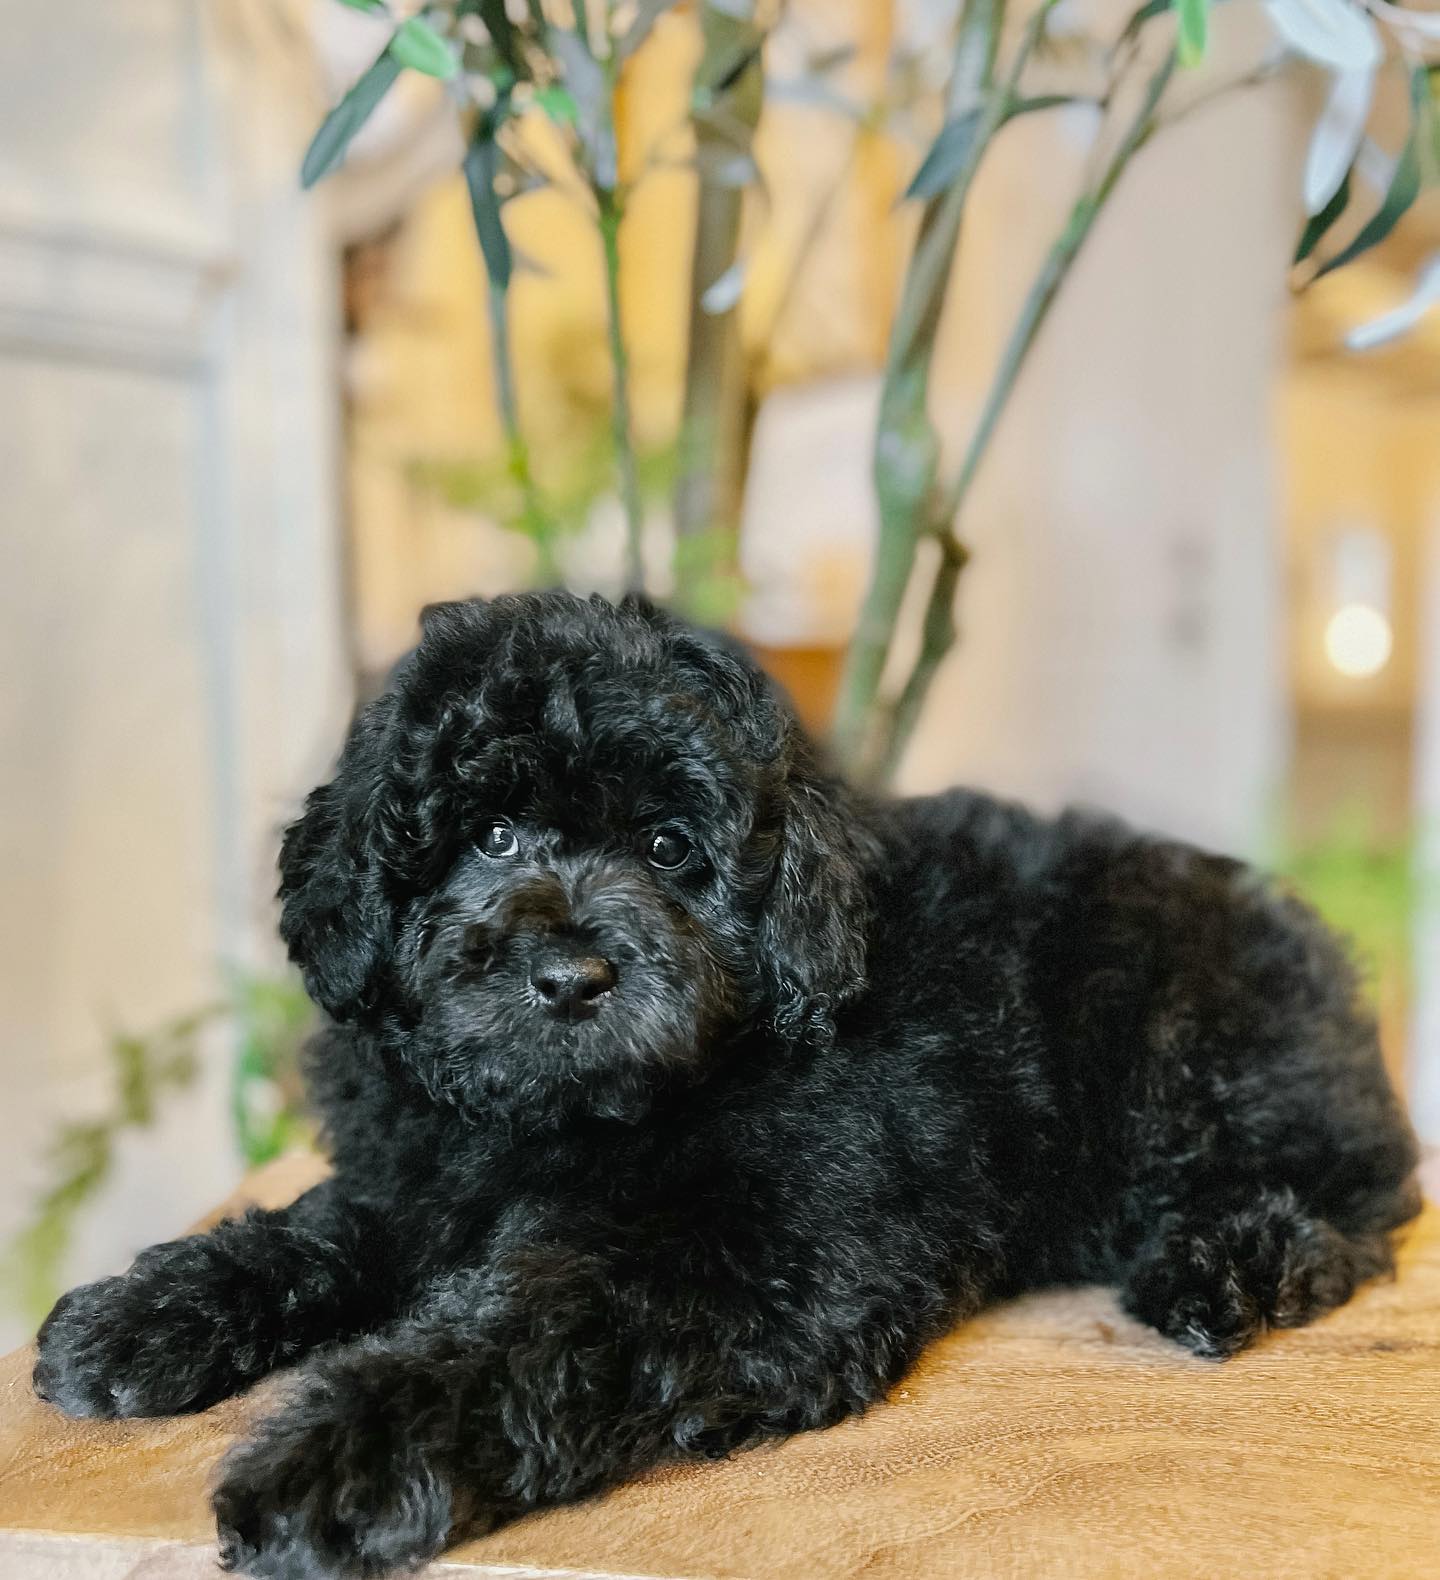 The Smeraglia Teddybear Goldendoodles are some of the most adorable black bears you'll ever see! They're allergy-friendly and make perfect pets.